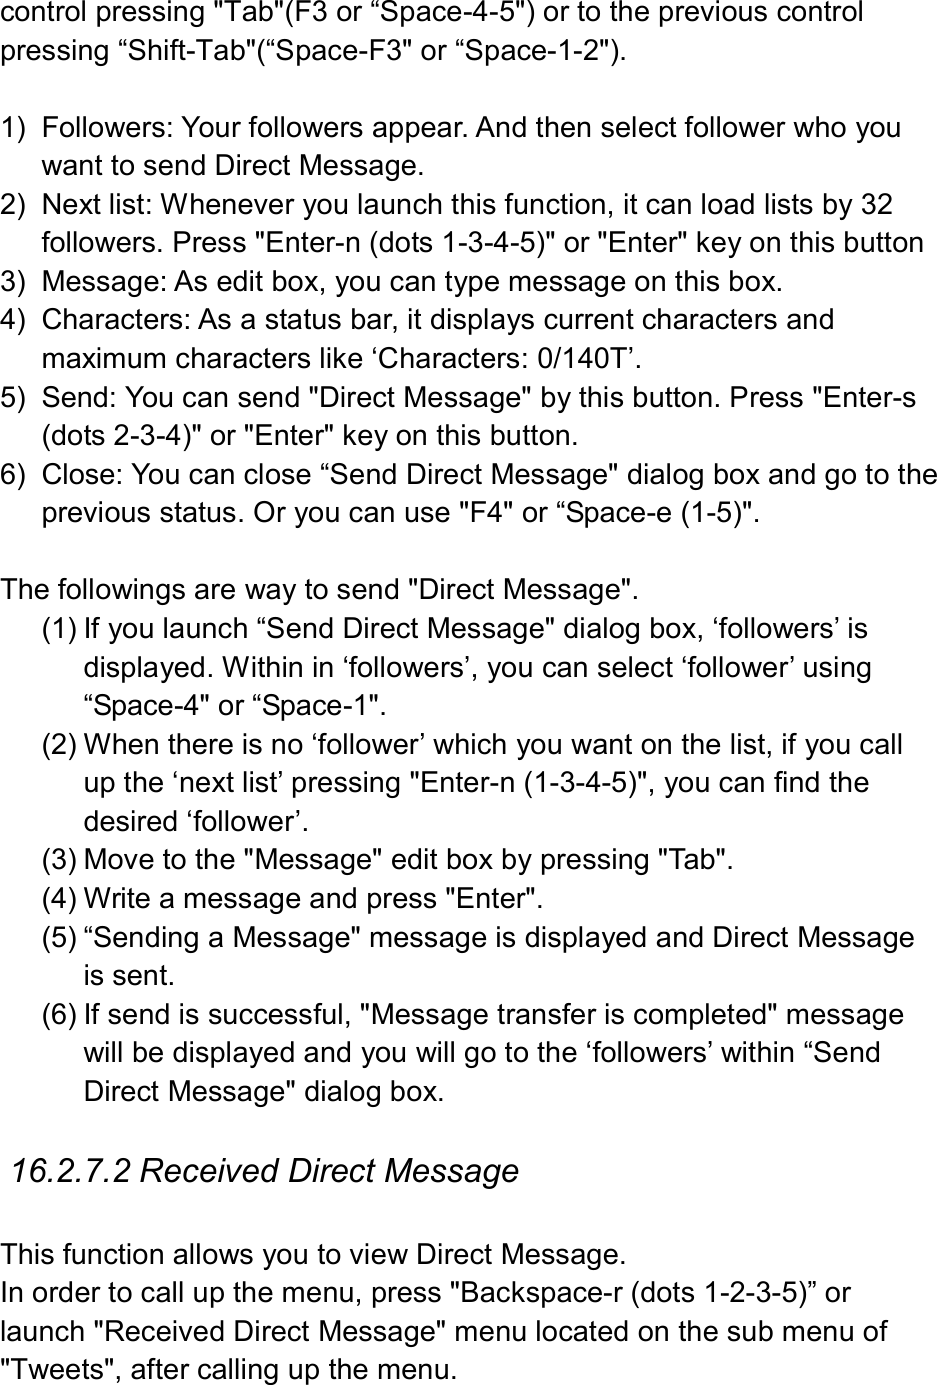  control pressing &quot;Tab&quot;(F3 or “Space-4-5&quot;) or to the previous control pressing “Shift-Tab&quot;(“Space-F3&quot; or “Space-1-2&quot;).  1)  Followers: Your followers appear. And then select follower who you want to send Direct Message. 2)  Next list: Whenever you launch this function, it can load lists by 32 followers. Press &quot;Enter-n (dots 1-3-4-5)&quot; or &quot;Enter&quot; key on this button 3)  Message: As edit box, you can type message on this box. 4)  Characters: As a status bar, it displays current characters and maximum characters like ‘Characters: 0/140T’. 5)  Send: You can send &quot;Direct Message&quot; by this button. Press &quot;Enter-s (dots 2-3-4)&quot; or &quot;Enter&quot; key on this button. 6)  Close: You can close “Send Direct Message&quot; dialog box and go to the previous status. Or you can use &quot;F4&quot; or “Space-e (1-5)&quot;.  The followings are way to send &quot;Direct Message&quot;.   (1) If you launch “Send Direct Message&quot; dialog box, ‘followers’ is displayed. Within in ‘followers’, you can select ‘follower’ using “Space-4&quot; or “Space-1&quot;. (2) When there is no ‘follower’ which you want on the list, if you call up the ‘next list’ pressing &quot;Enter-n (1-3-4-5)&quot;, you can find the desired ‘follower’. (3) Move to the &quot;Message&quot; edit box by pressing &quot;Tab&quot;. (4) Write a message and press &quot;Enter&quot;. (5) “Sending a Message&quot; message is displayed and Direct Message is sent.   (6) If send is successful, &quot;Message transfer is completed&quot; message will be displayed and you will go to the ‘followers’ within “Send Direct Message&quot; dialog box.    16.2.7.2 Received Direct Message  This function allows you to view Direct Message. In order to call up the menu, press &quot;Backspace-r (dots 1-2-3-5)” or launch &quot;Received Direct Message&quot; menu located on the sub menu of &quot;Tweets&quot;, after calling up the menu. 